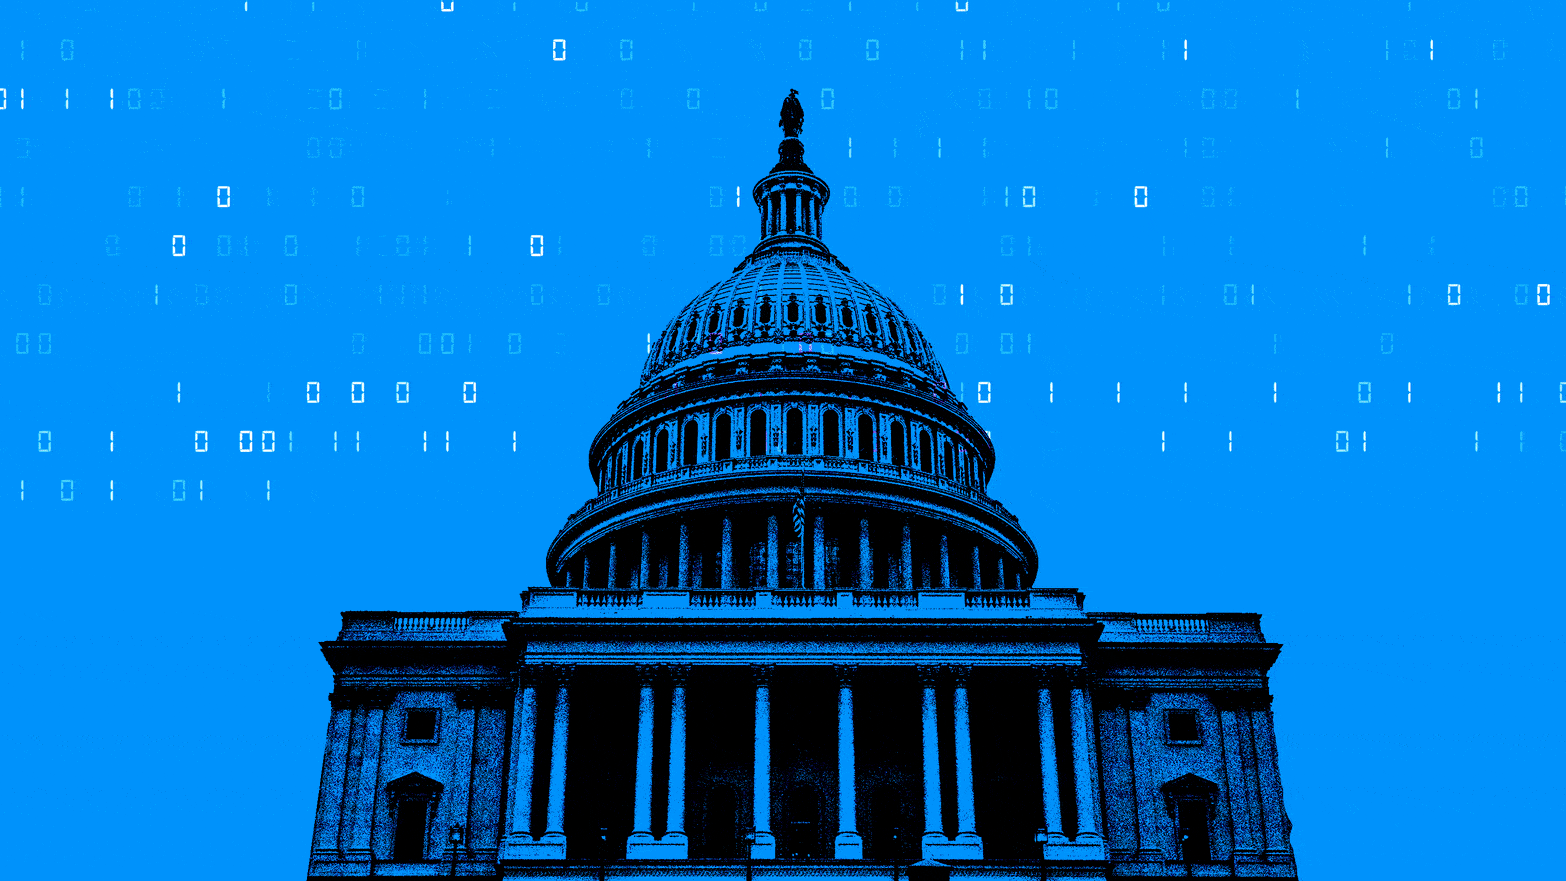 An illustration including the capitol hill building and binary code 